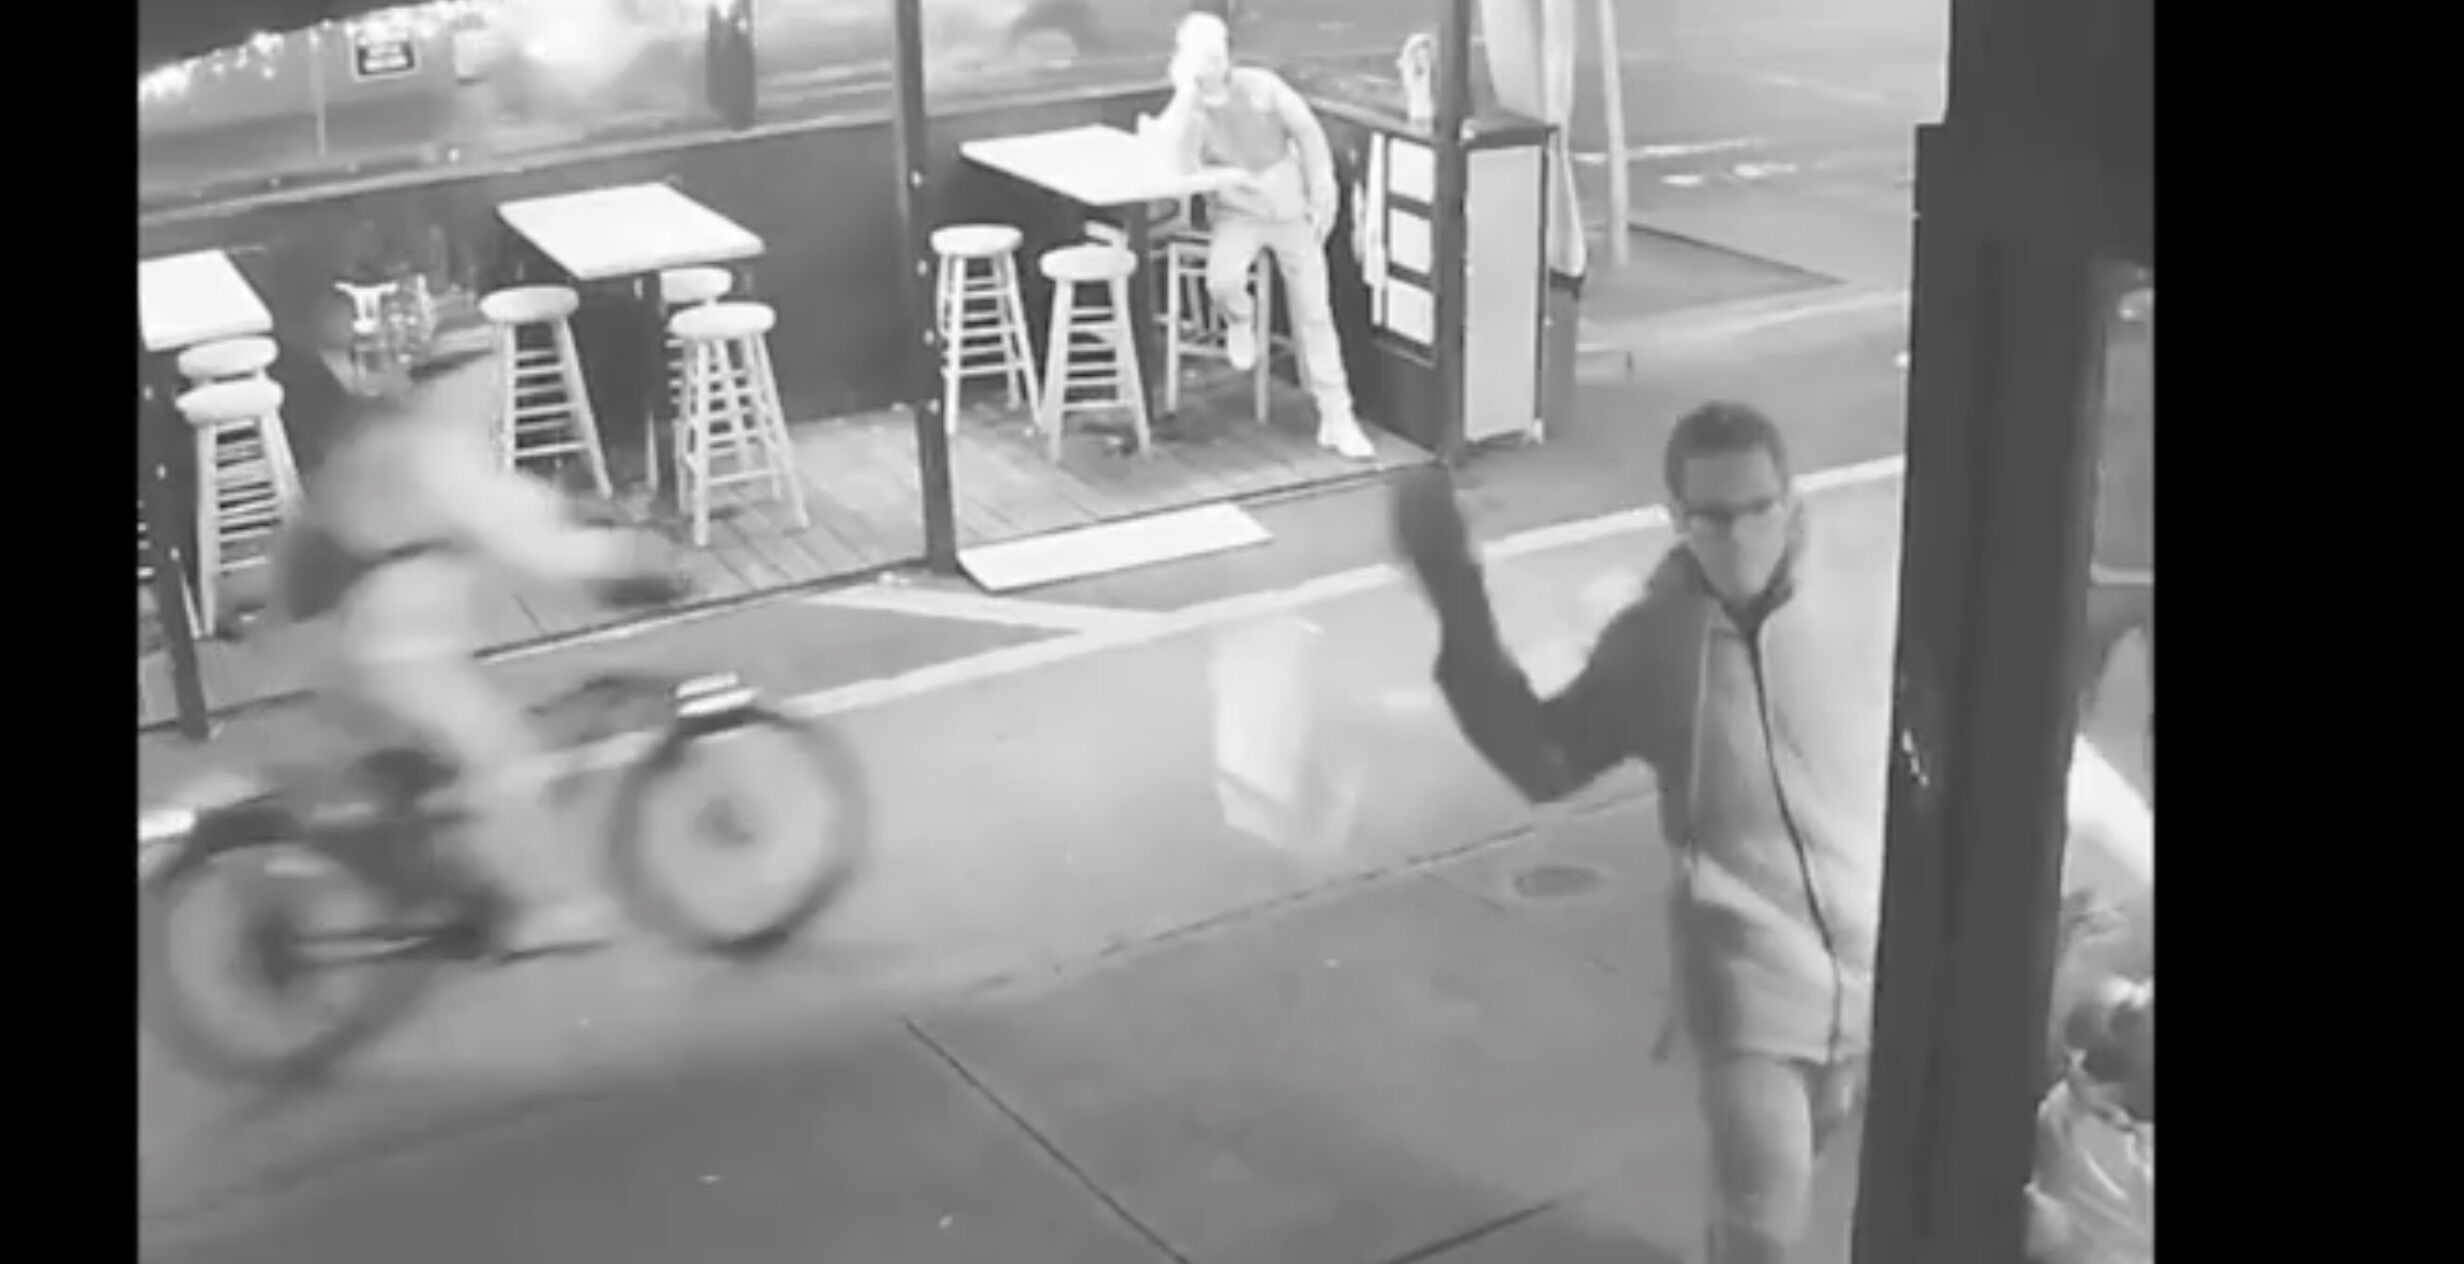 Someone throws a brick at the window of LGBTQ bar VERS in New York City